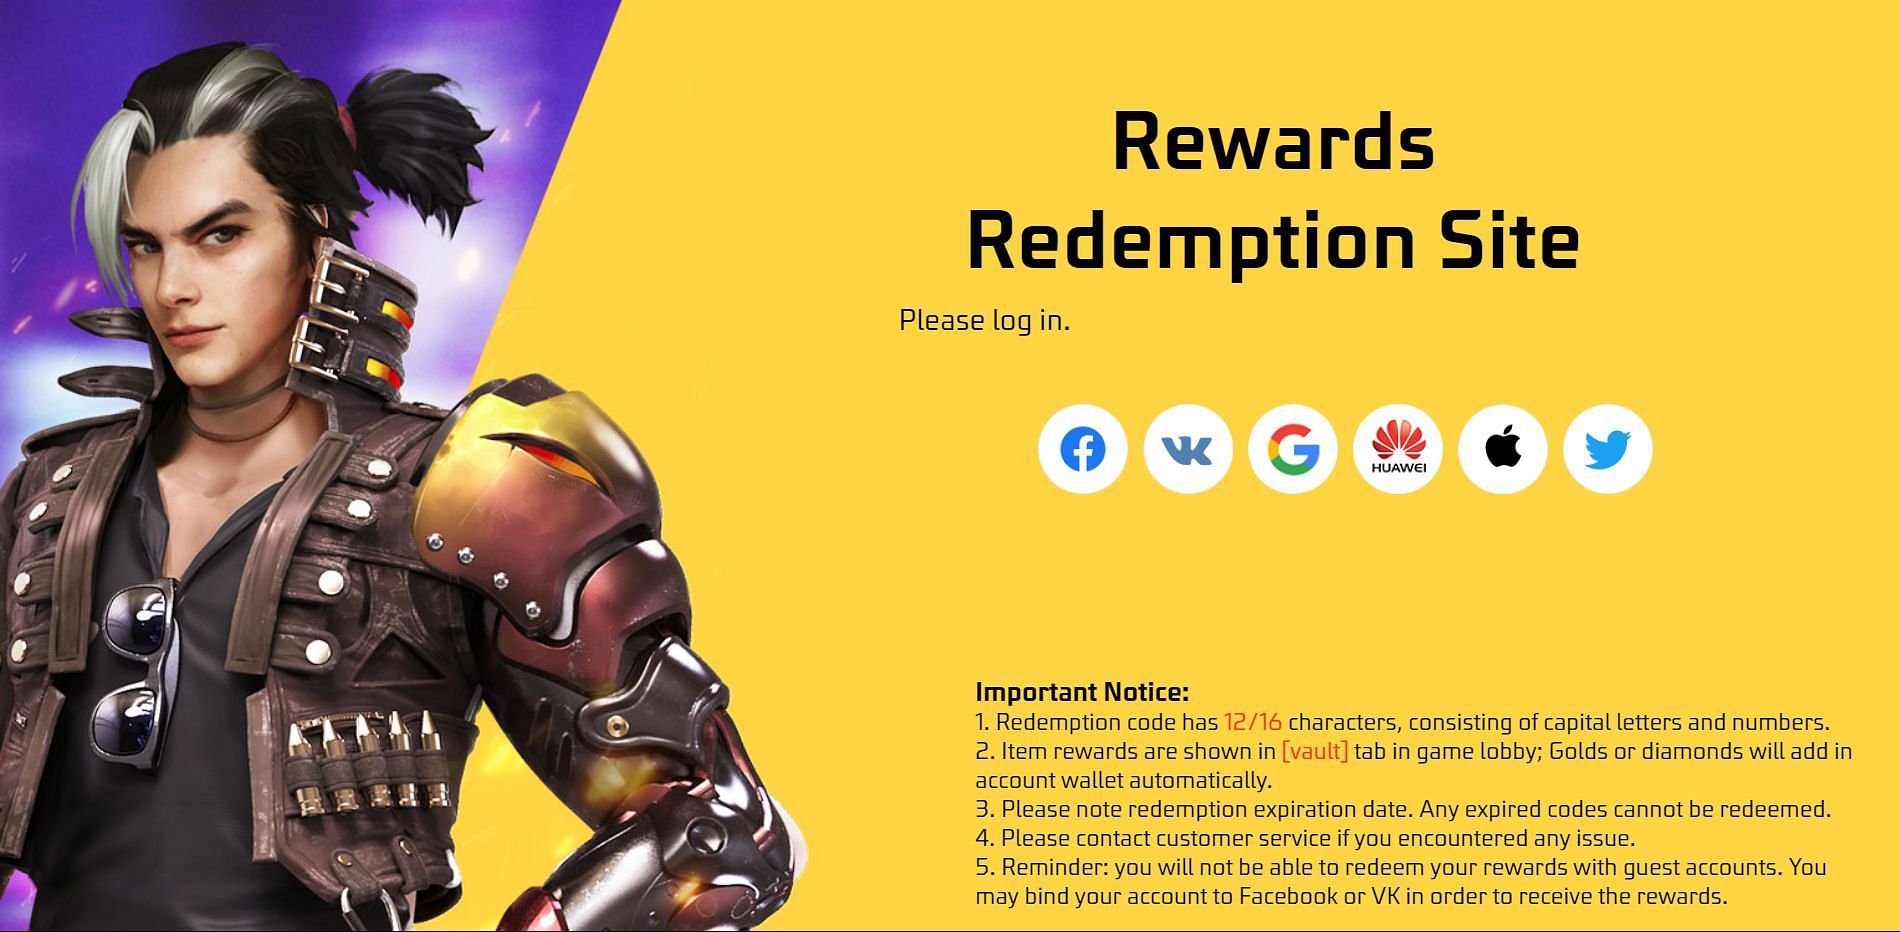 There are six log-in options offered by Garena on the Rewards Redemption Site (Image via Garena)